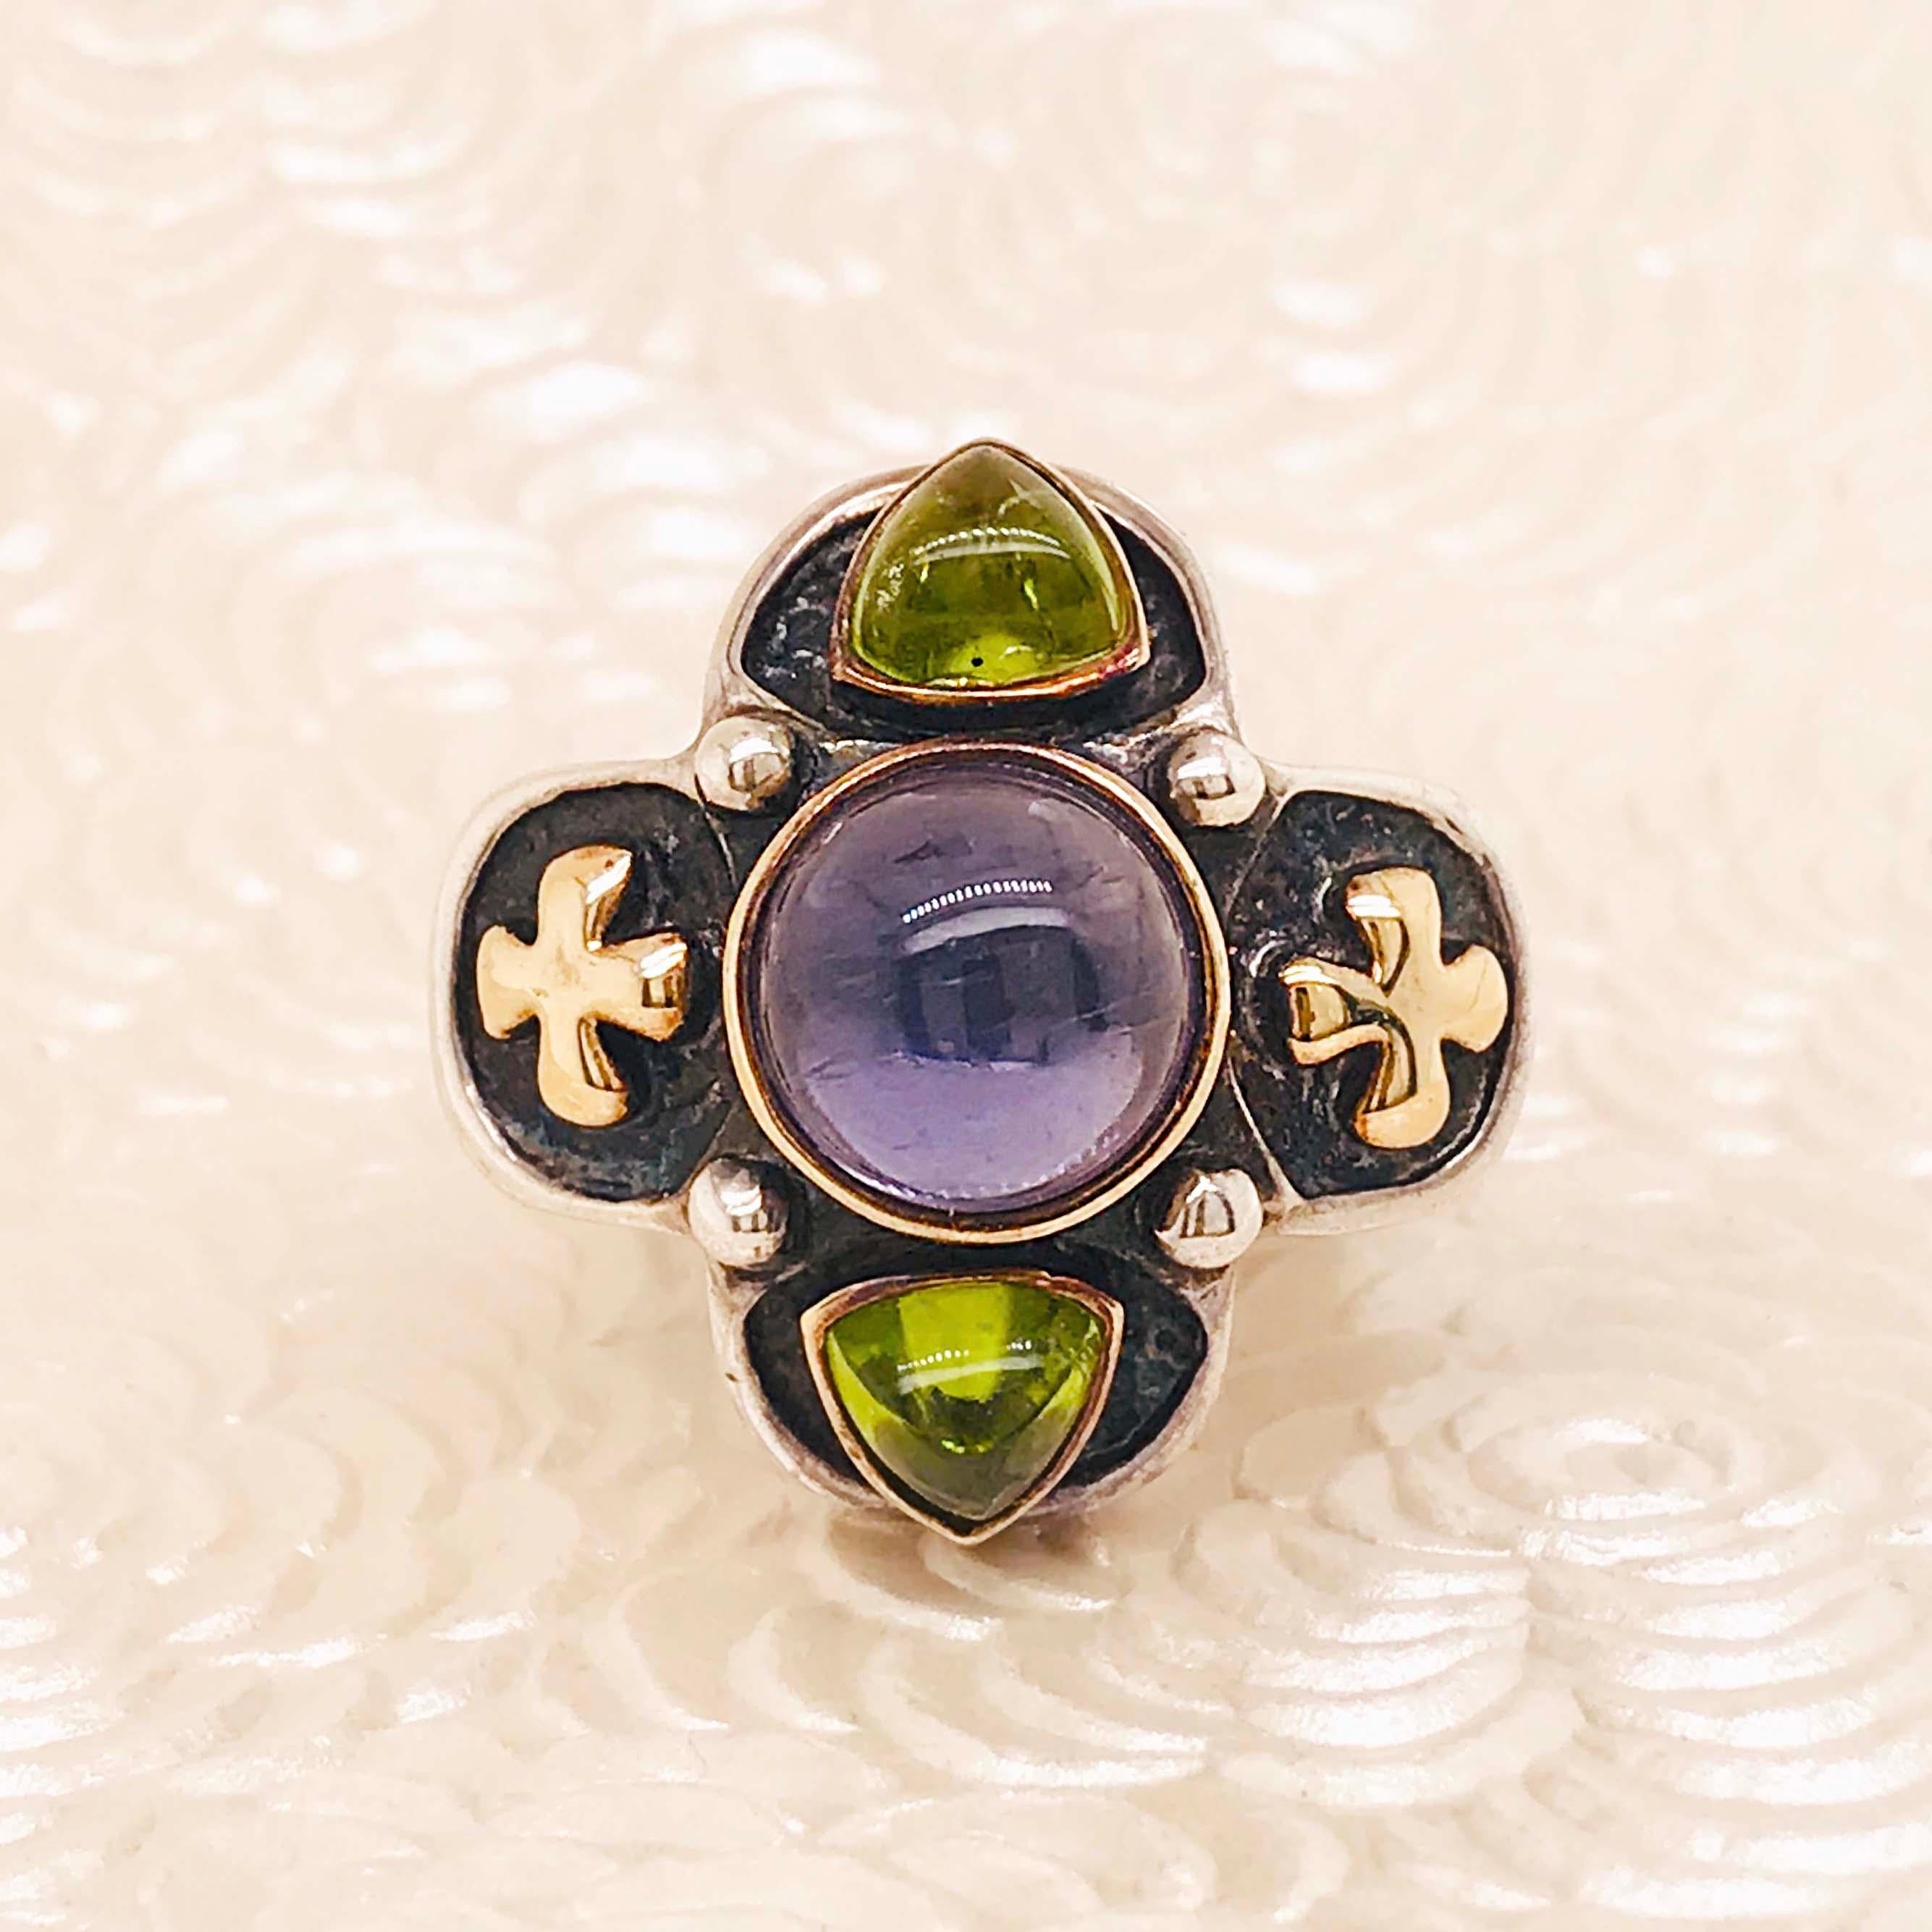 Carol Henry Designs 2.00 Carat Iolite and 1.50 Carat Peridot Ring 14K & Sterling For Sale 1